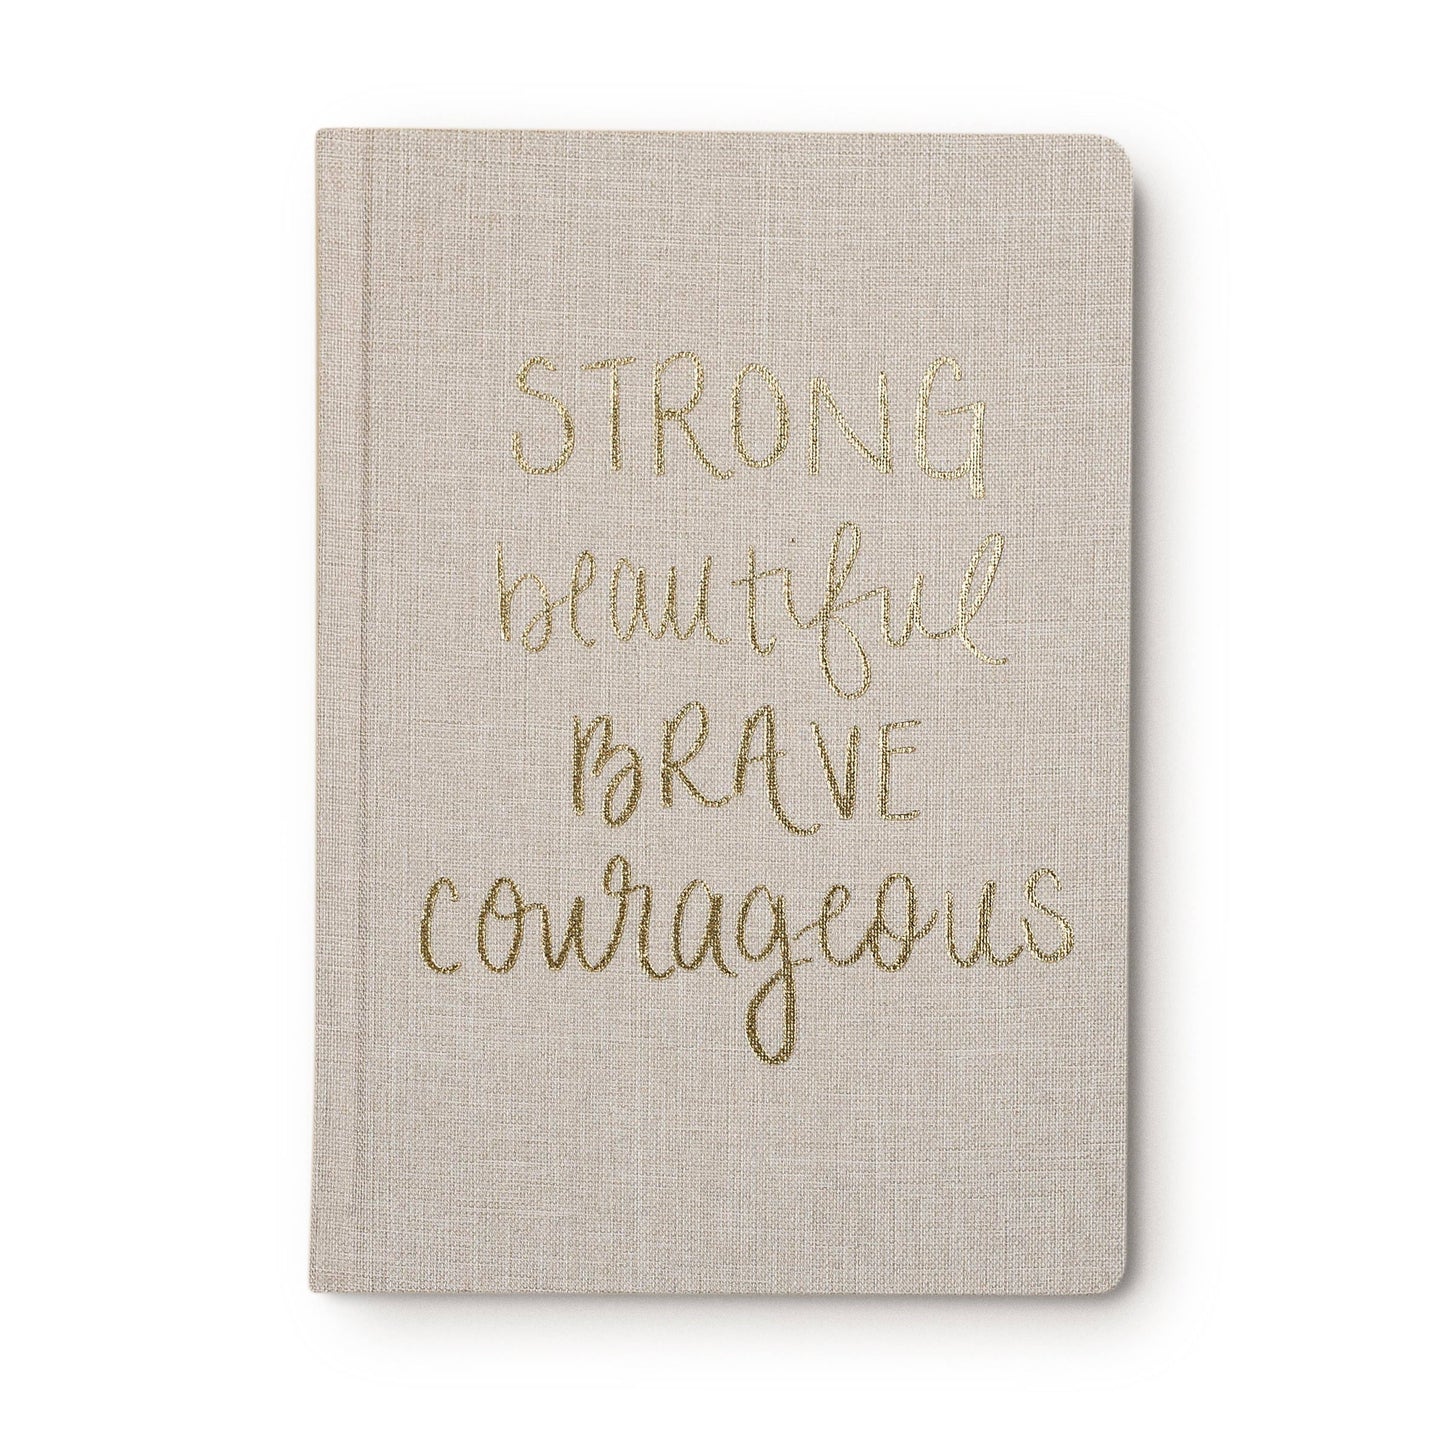 Sweet Water Decor - Strong Beautiful Brave Courageous - Tan Fabric Journal